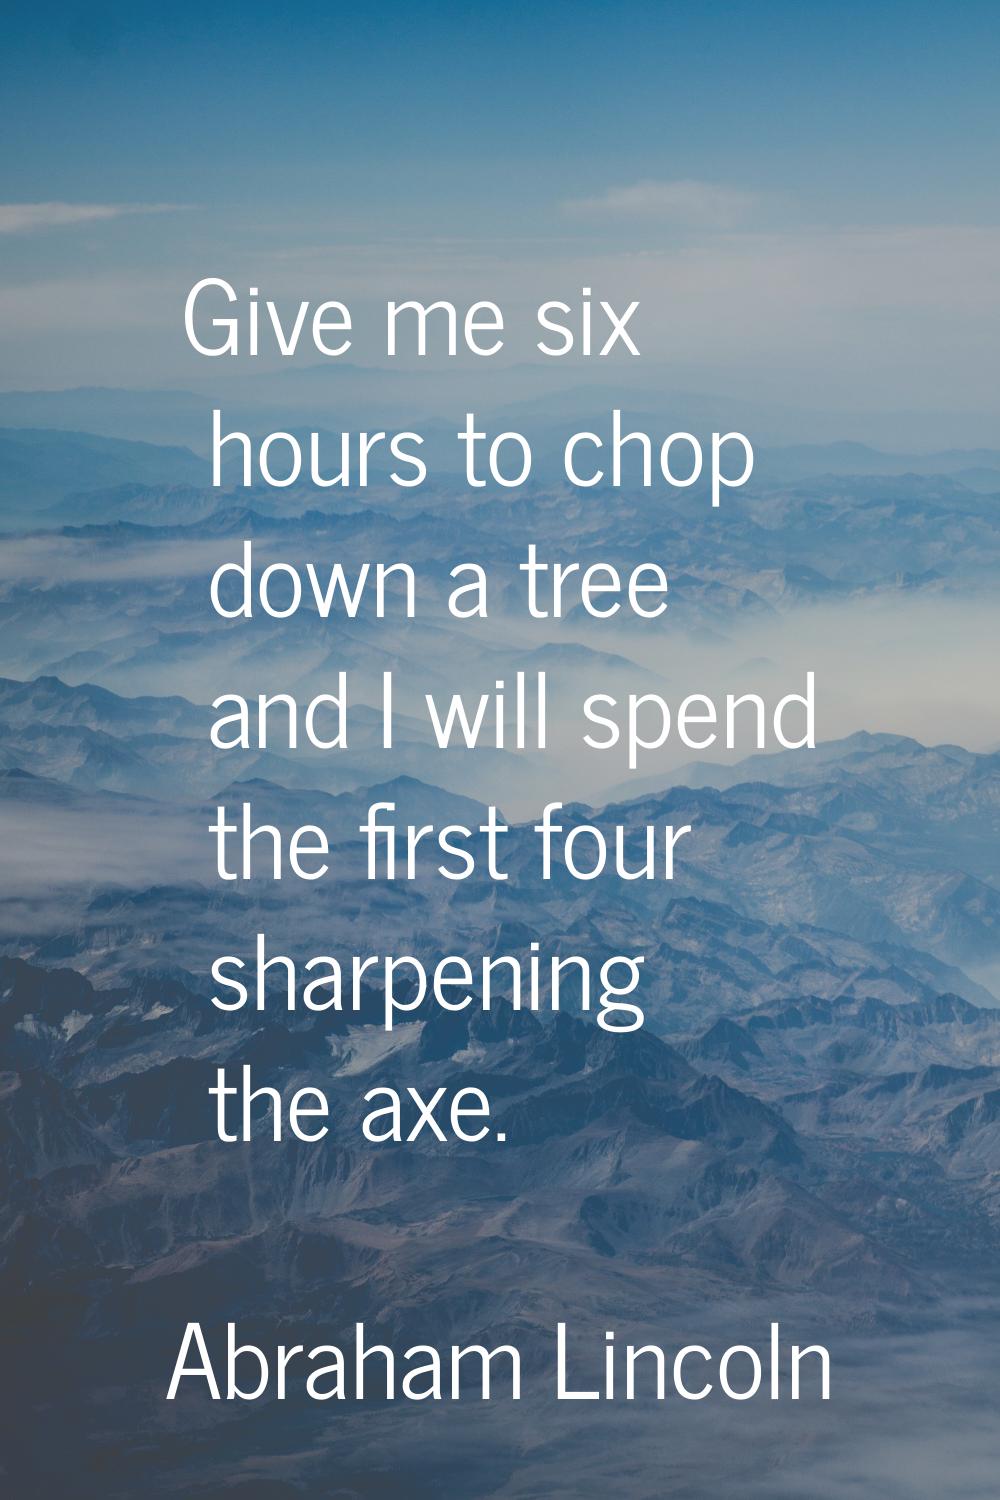 Give me six hours to chop down a tree and I will spend the first four sharpening the axe.